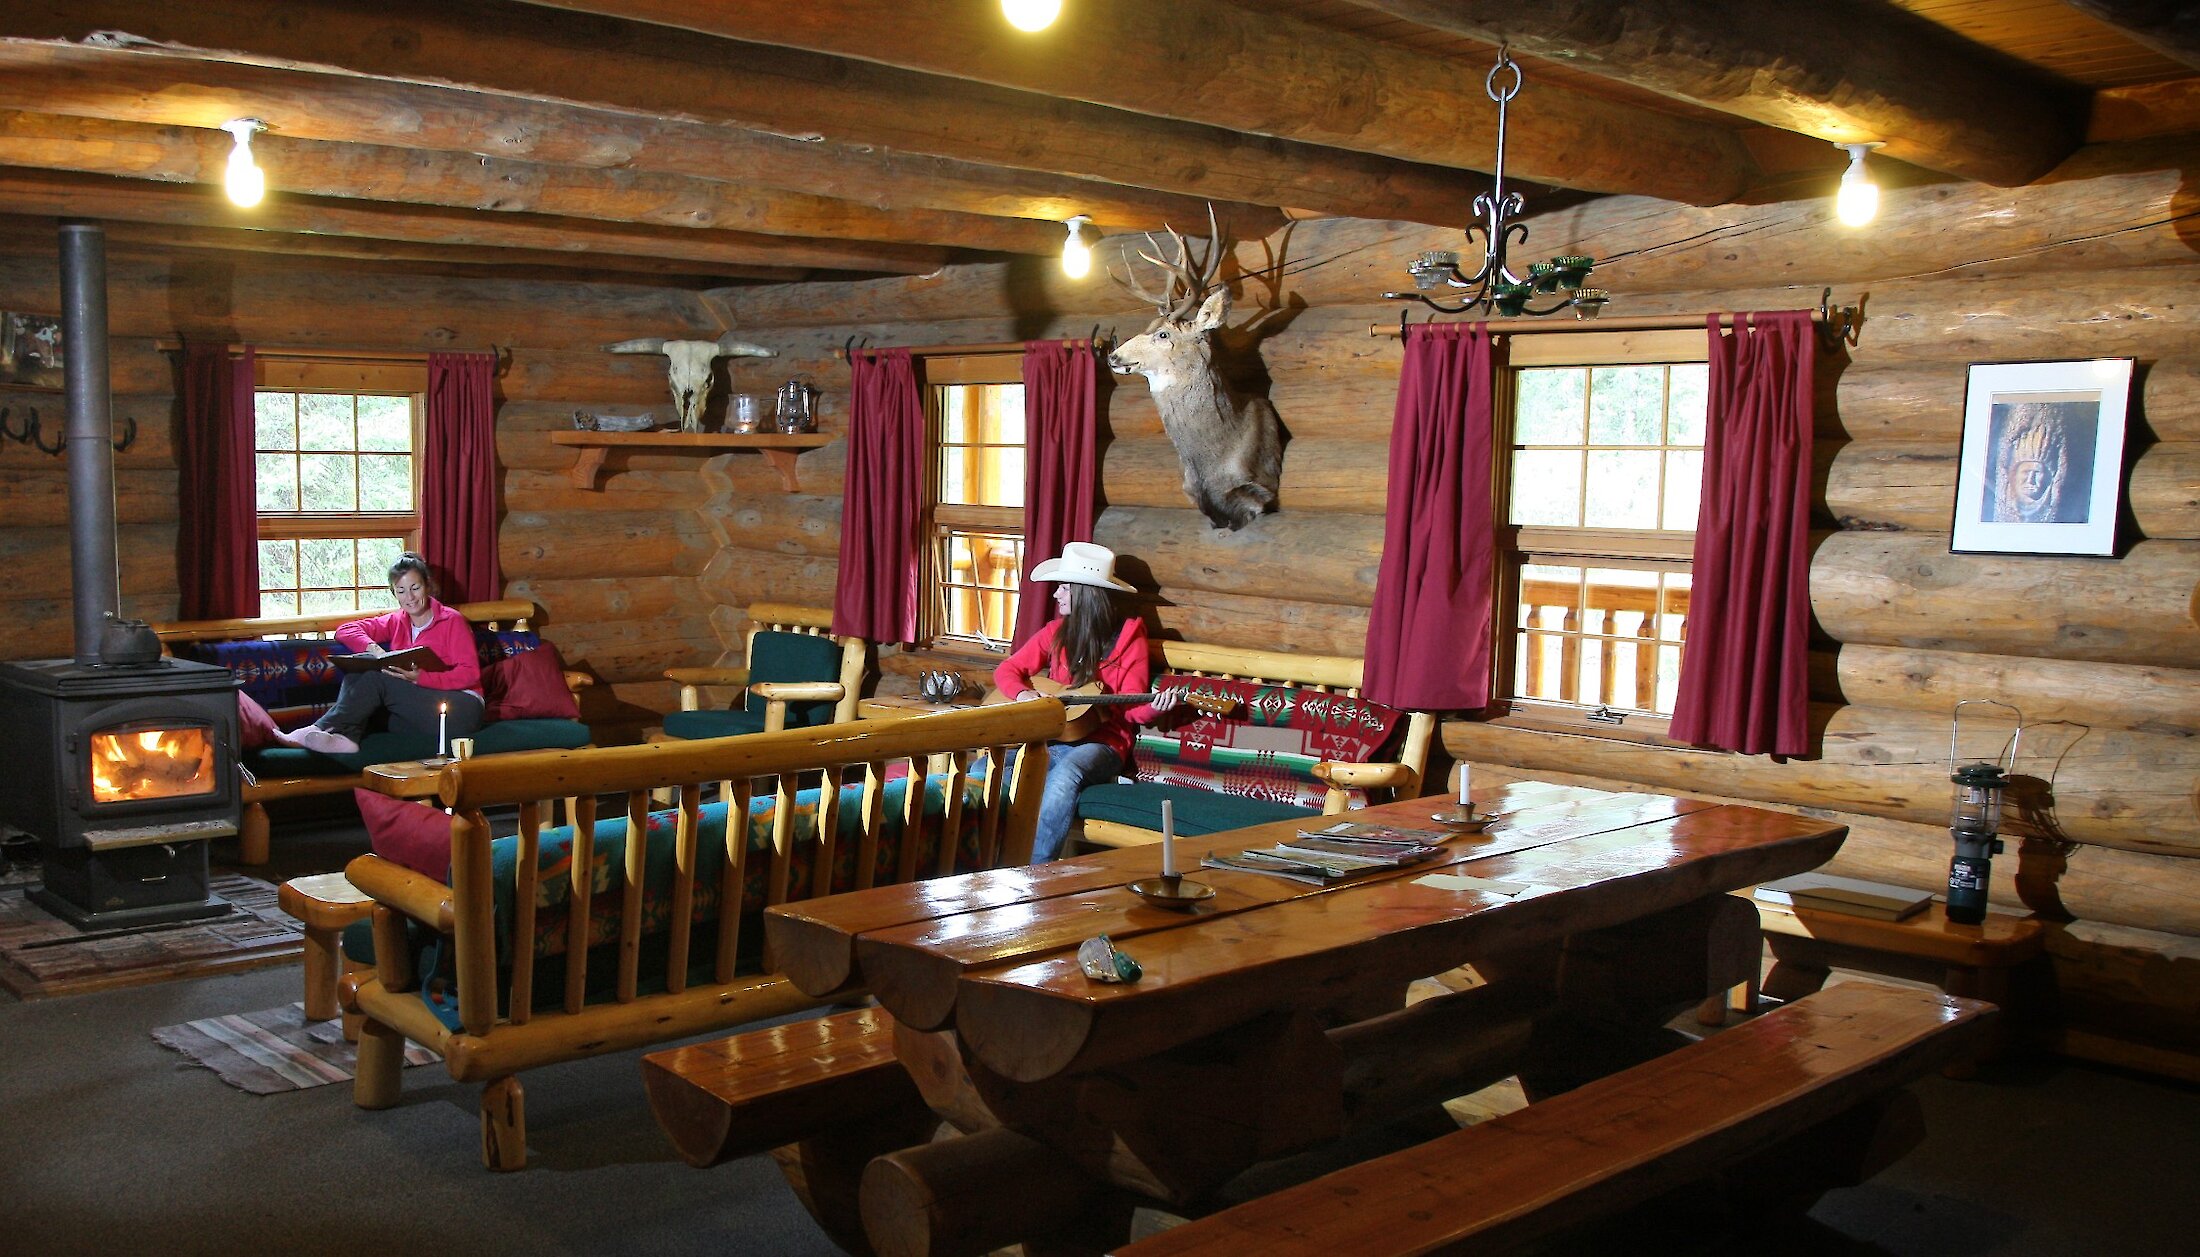 Guests relaxing in the lodge by the fire in Banff National park